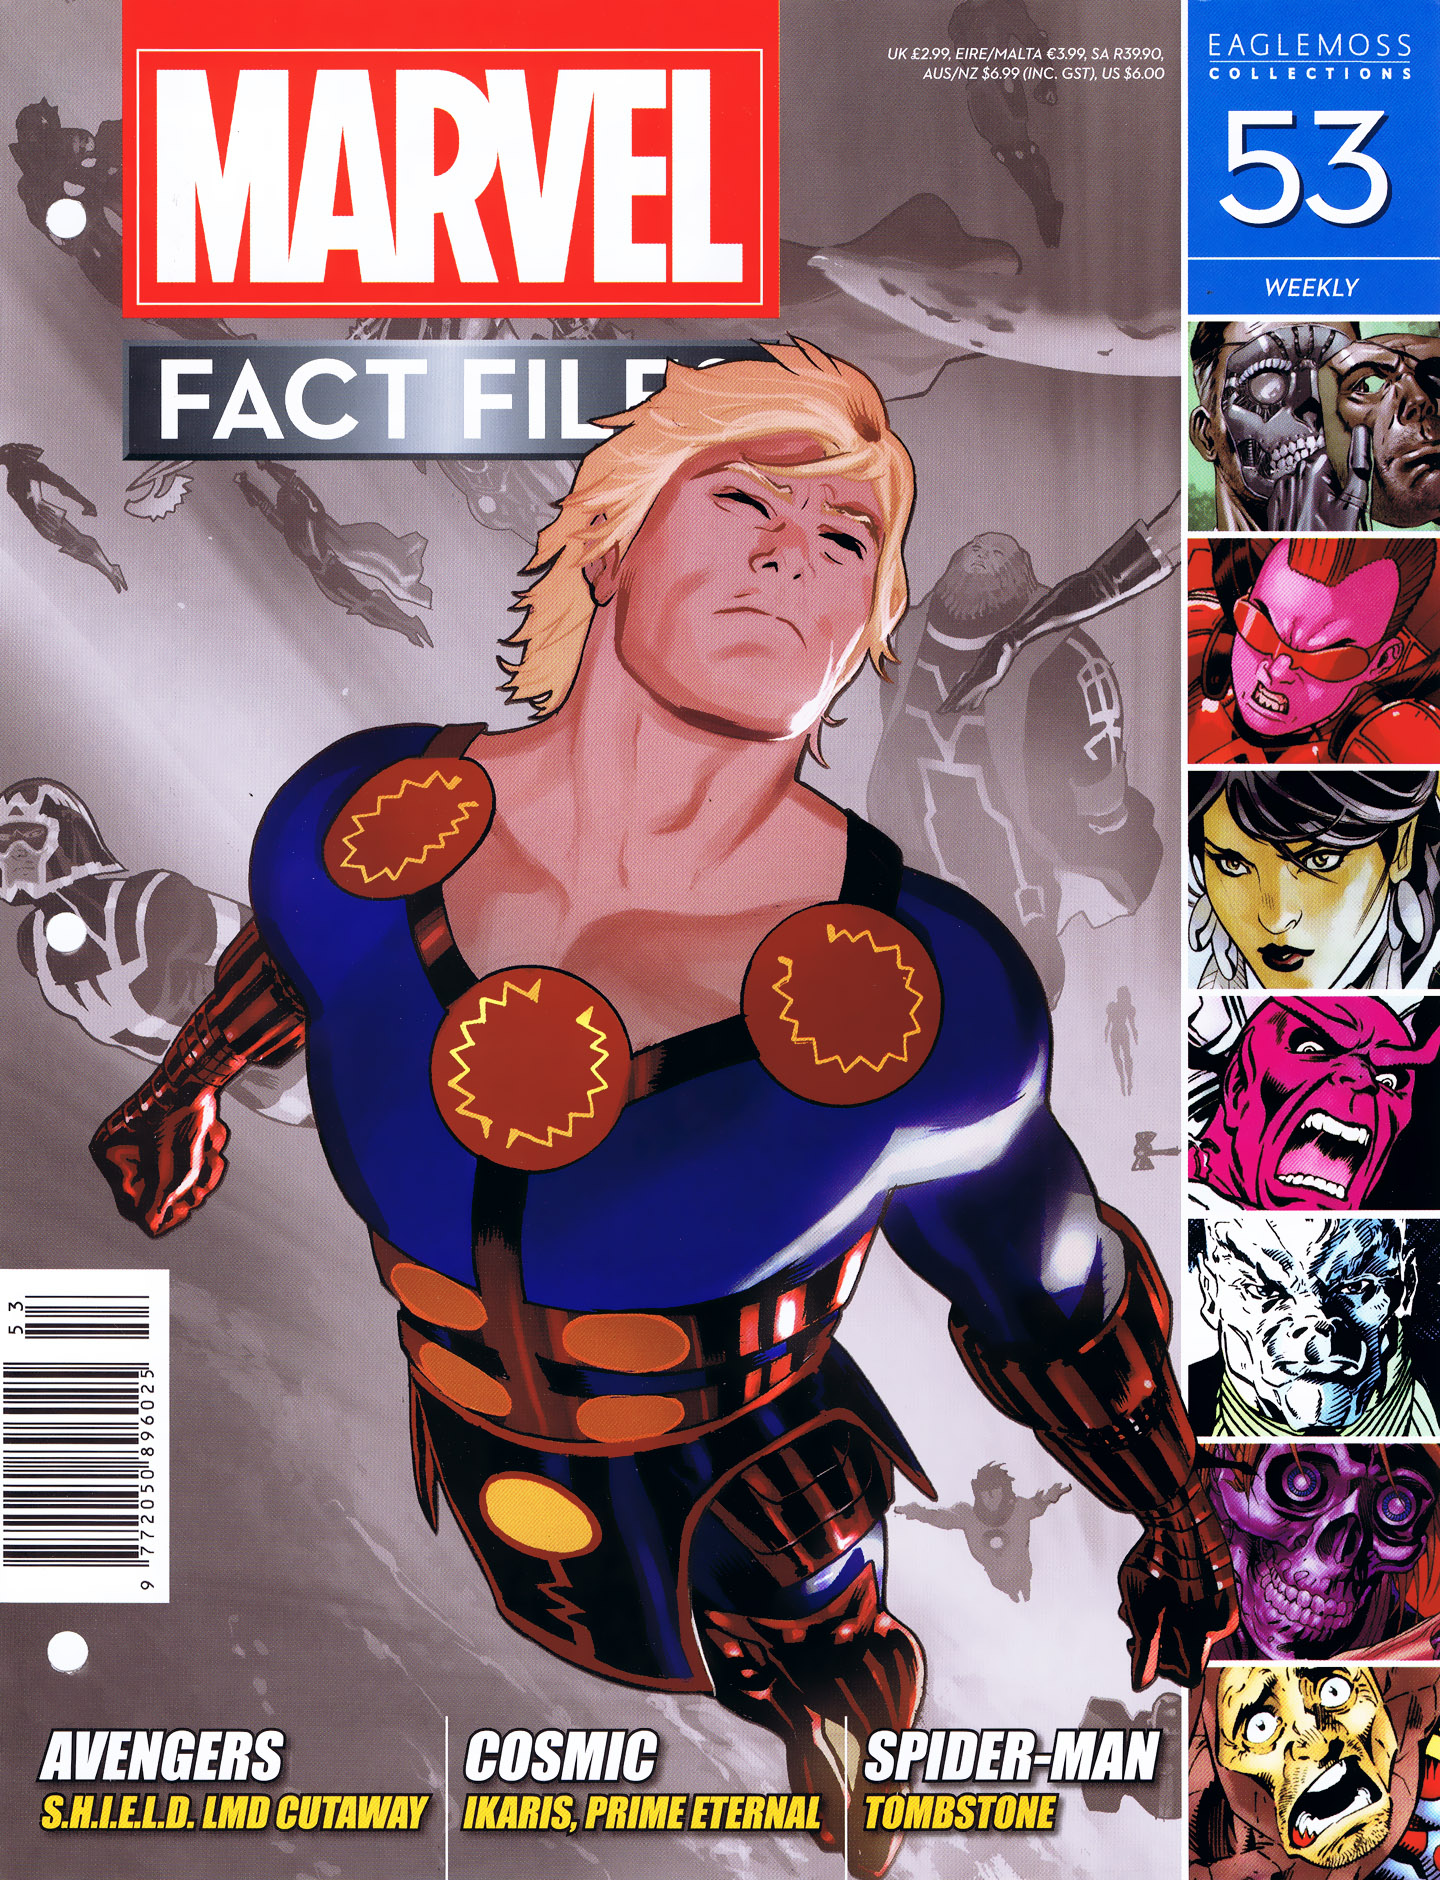 Read online Marvel Fact Files comic -  Issue #53 - 1